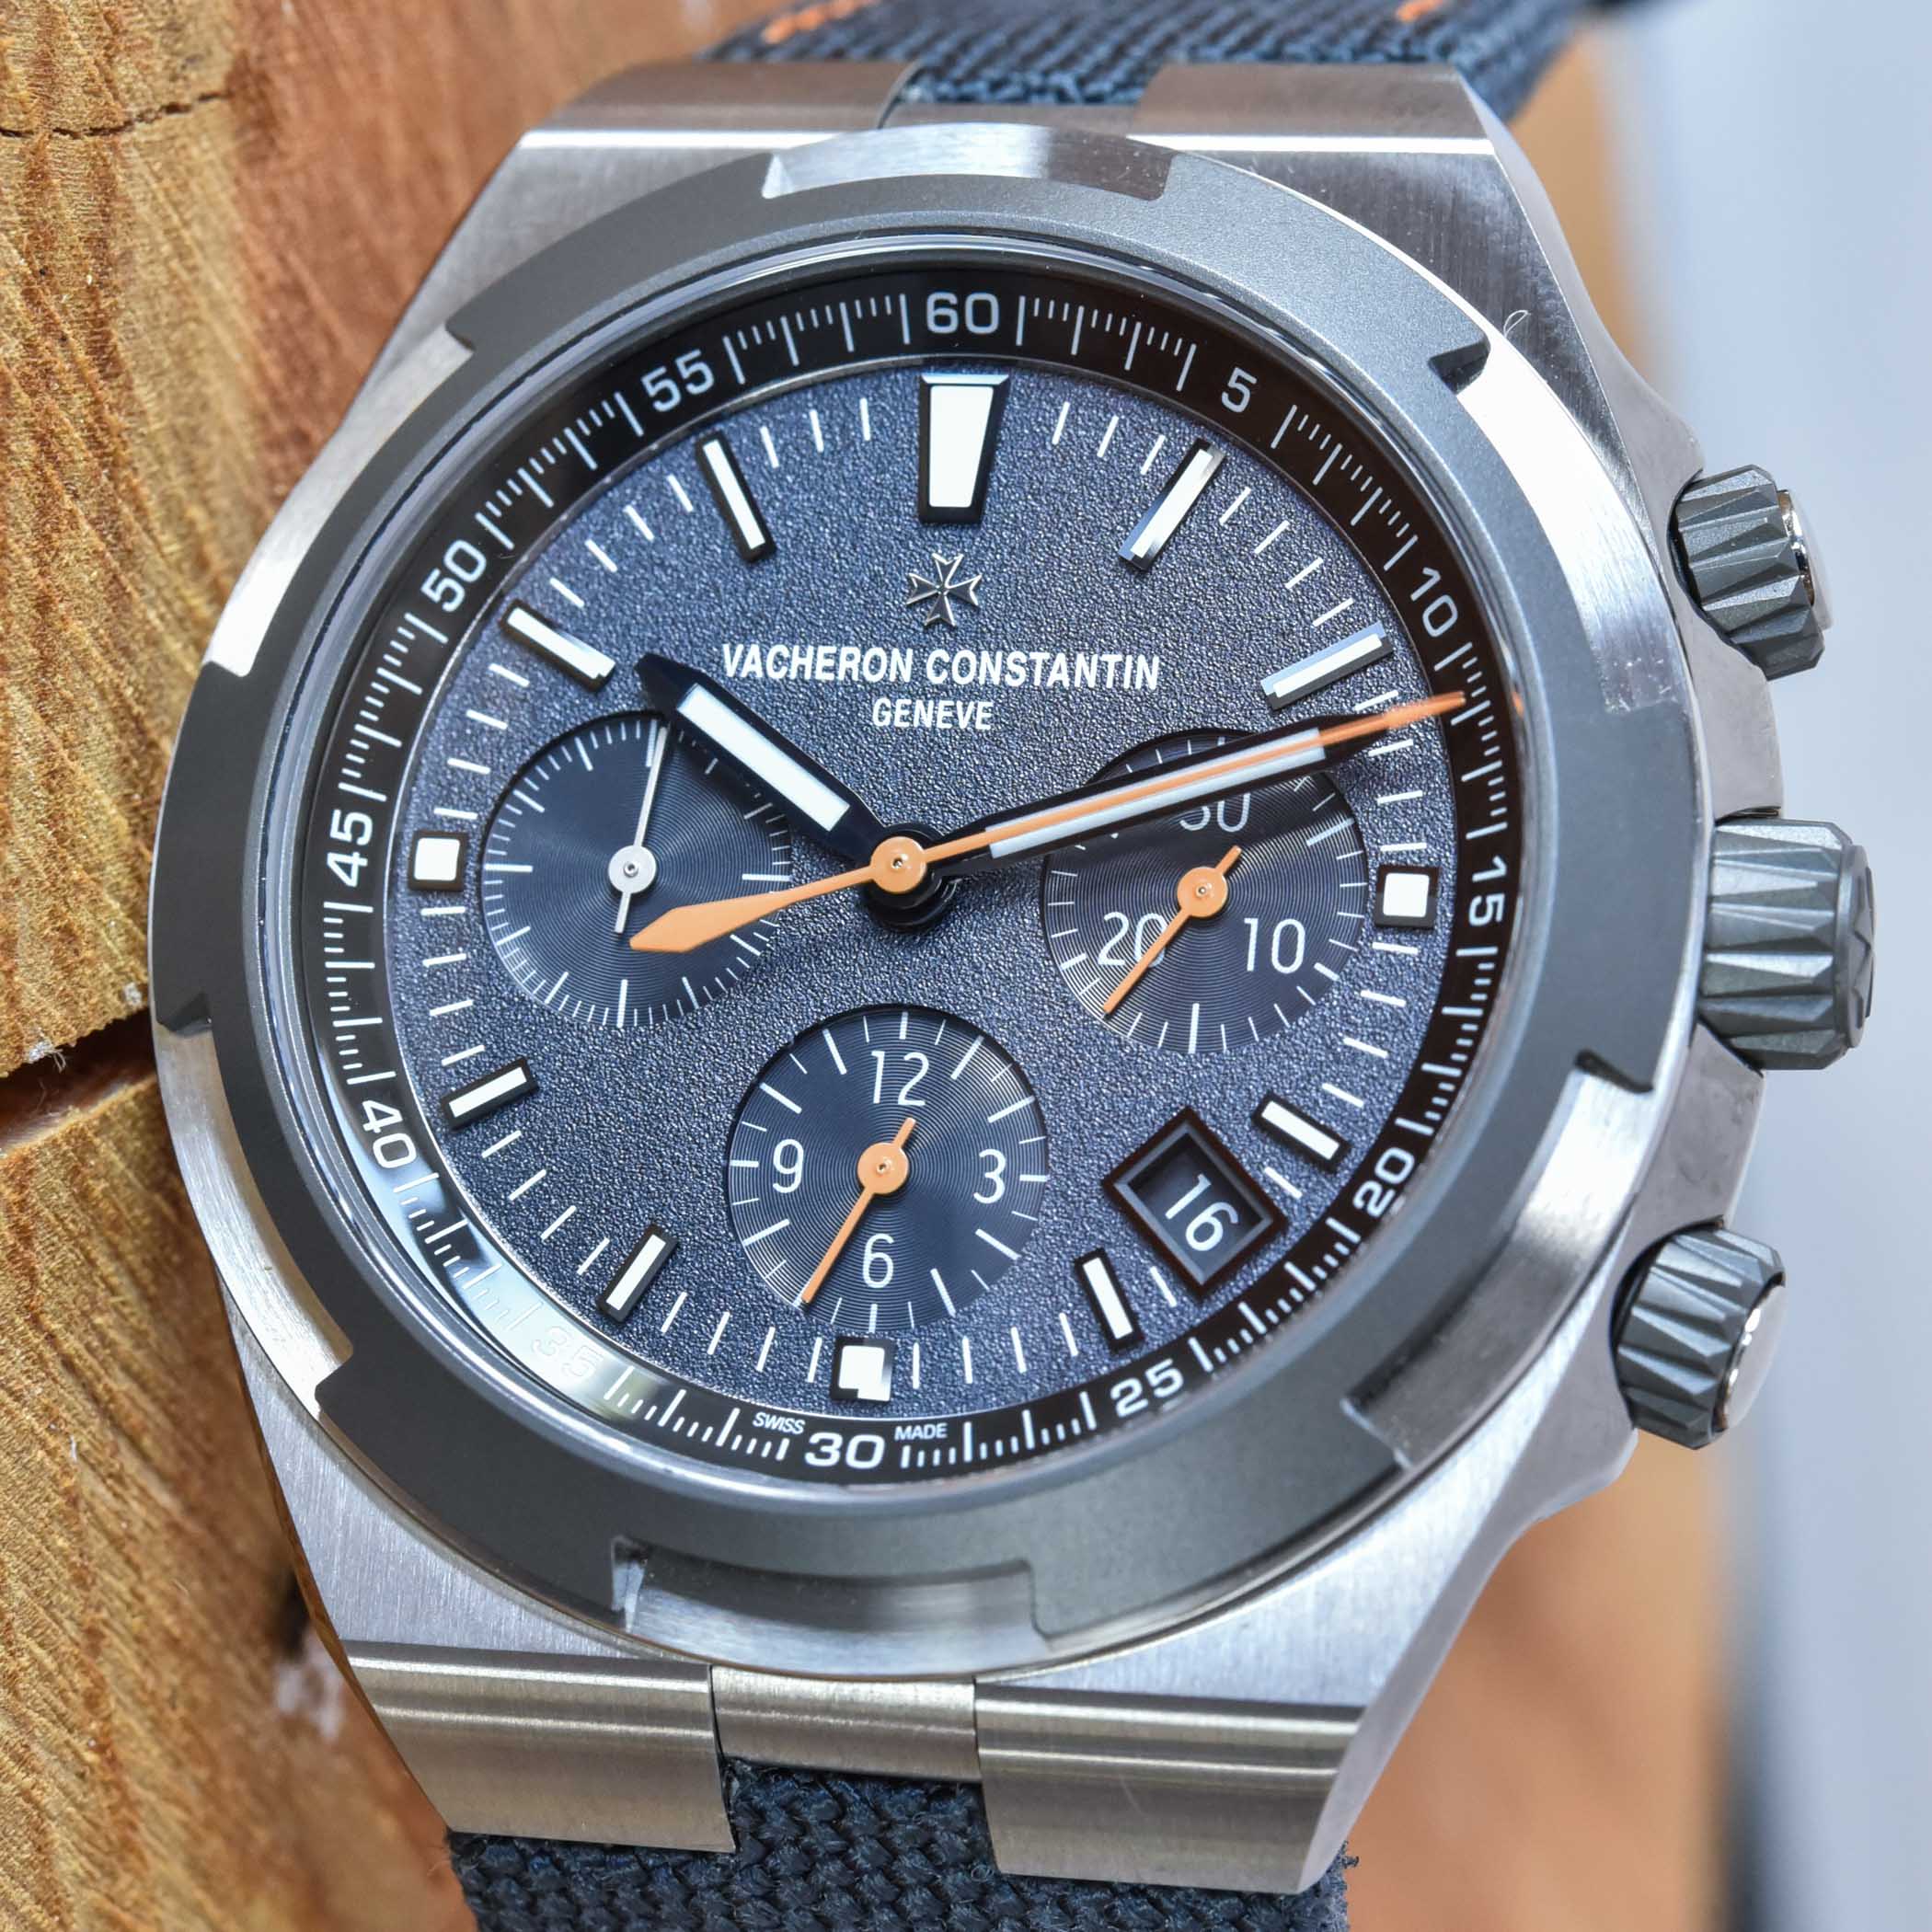 Vacheron Constantin Overseas Limited Editions Everest review